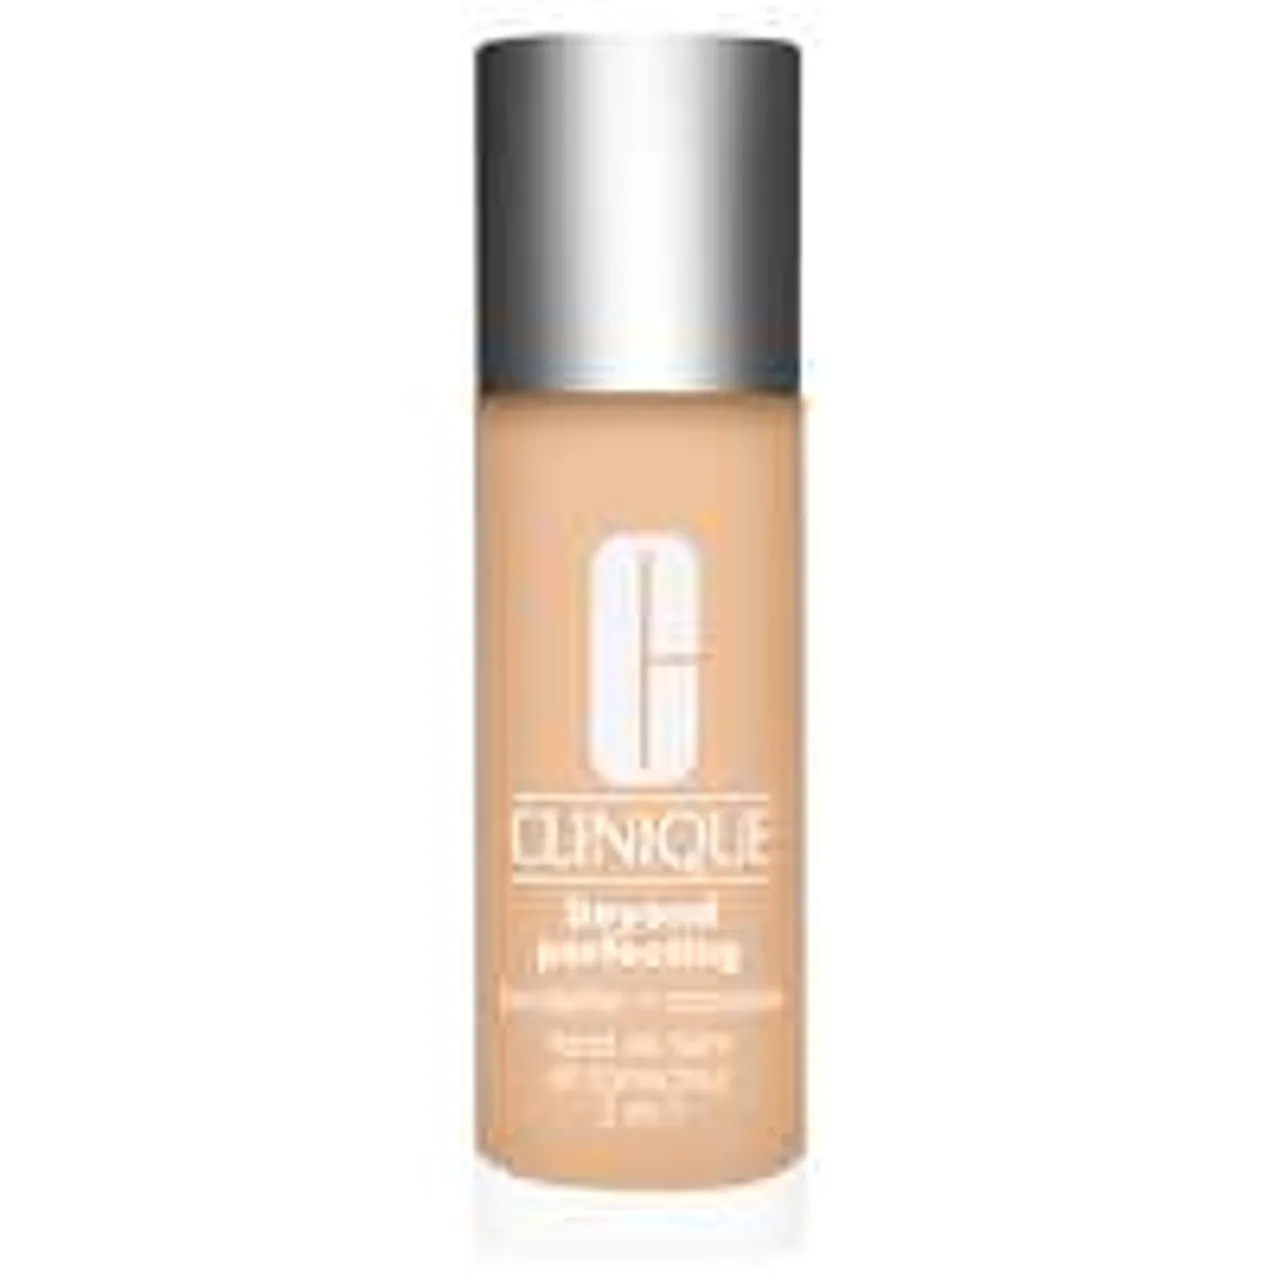 Clinique Beyond Perfecting Foundation + Concealer CN 18 Cream Whip 30ml / 1 fl.oz.